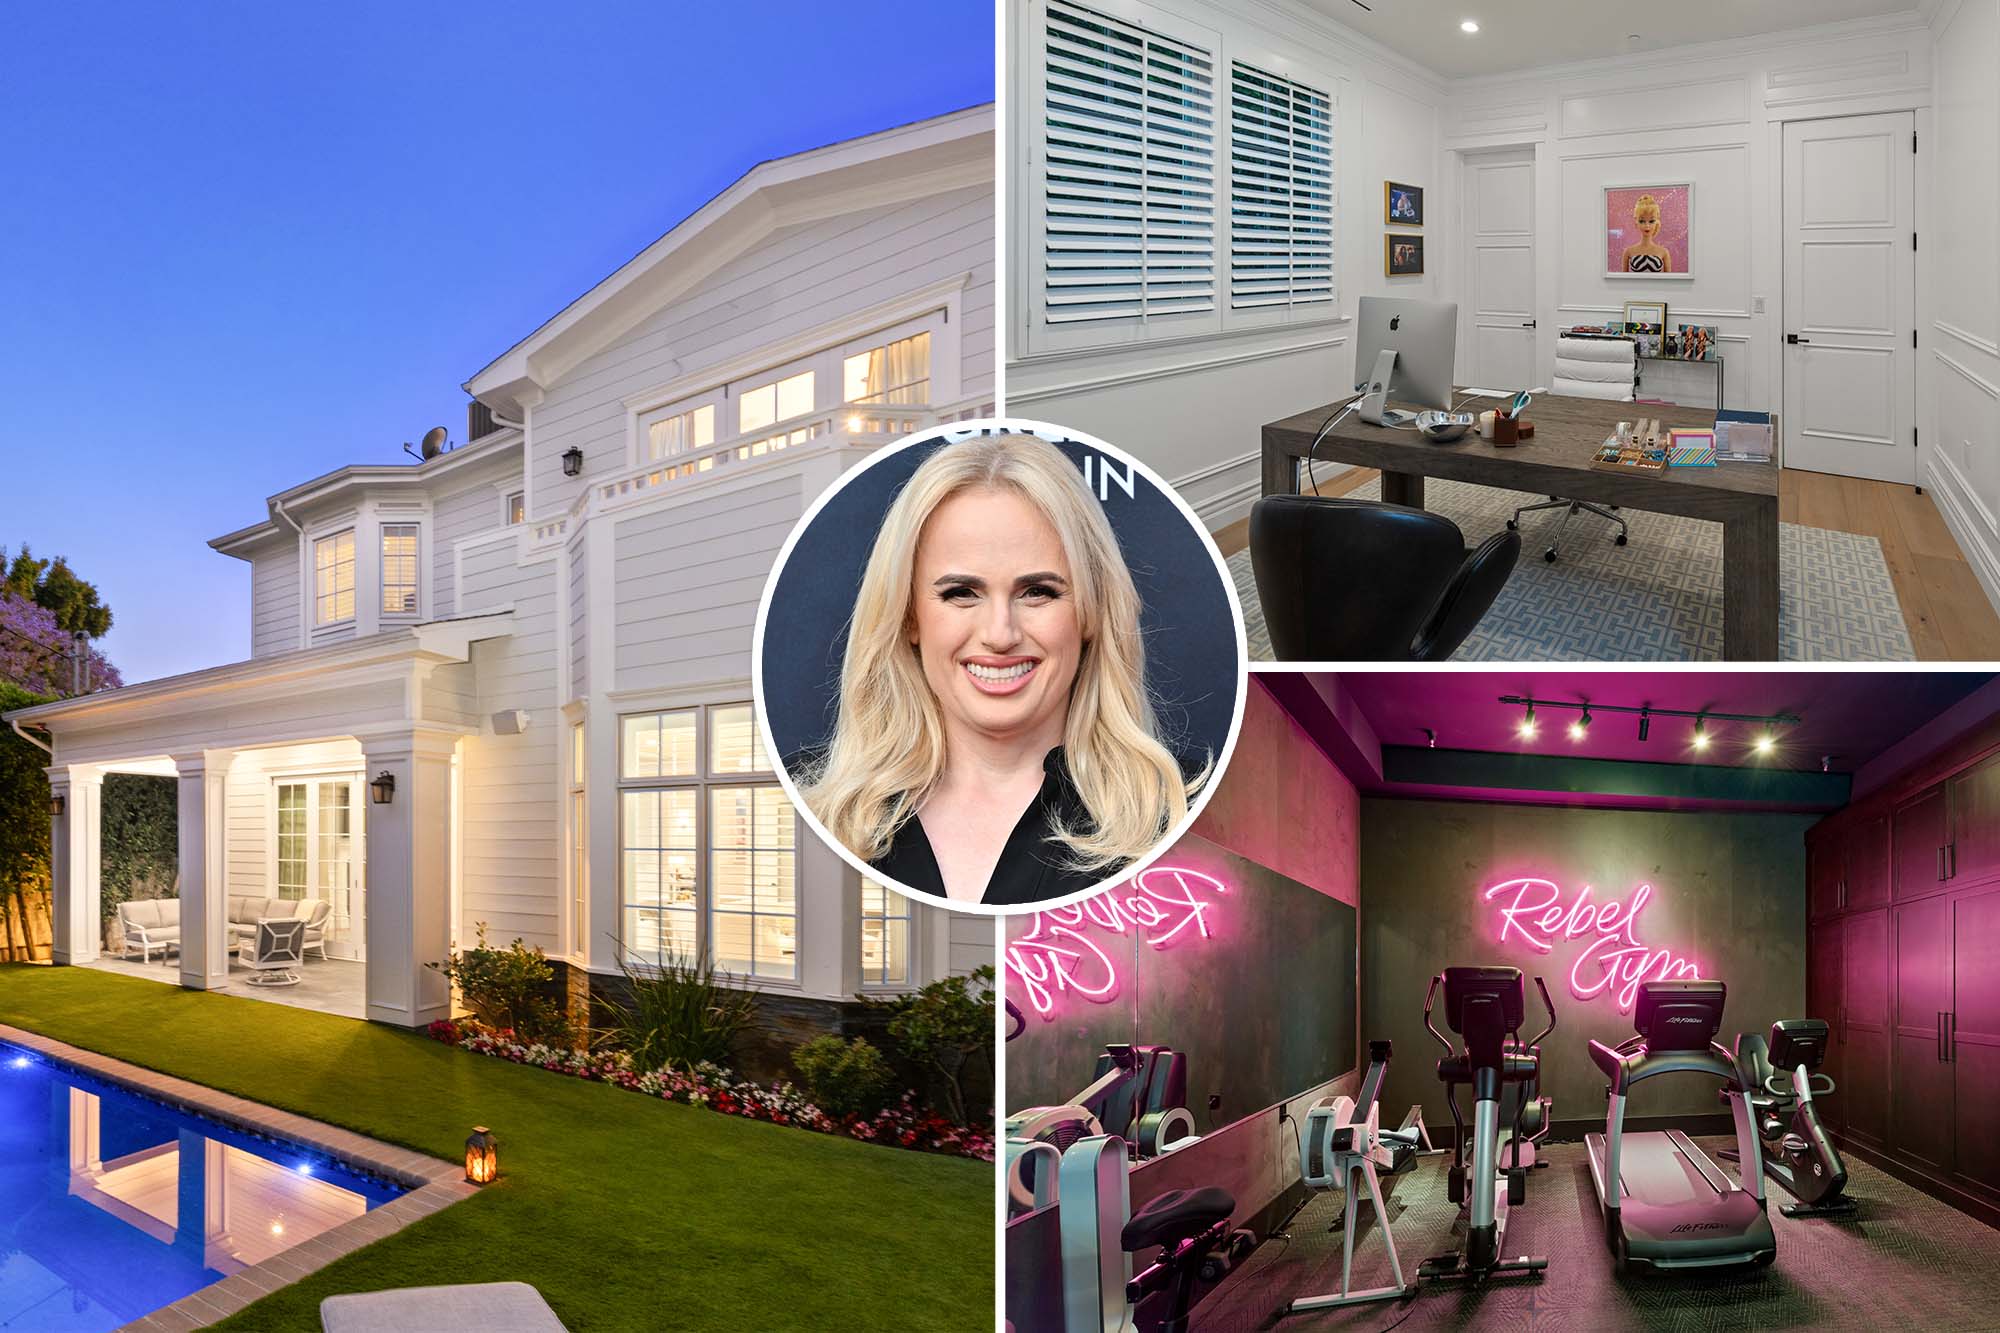 Rebel Wilson wants $4.15M for her West Hollywood ‘office house’